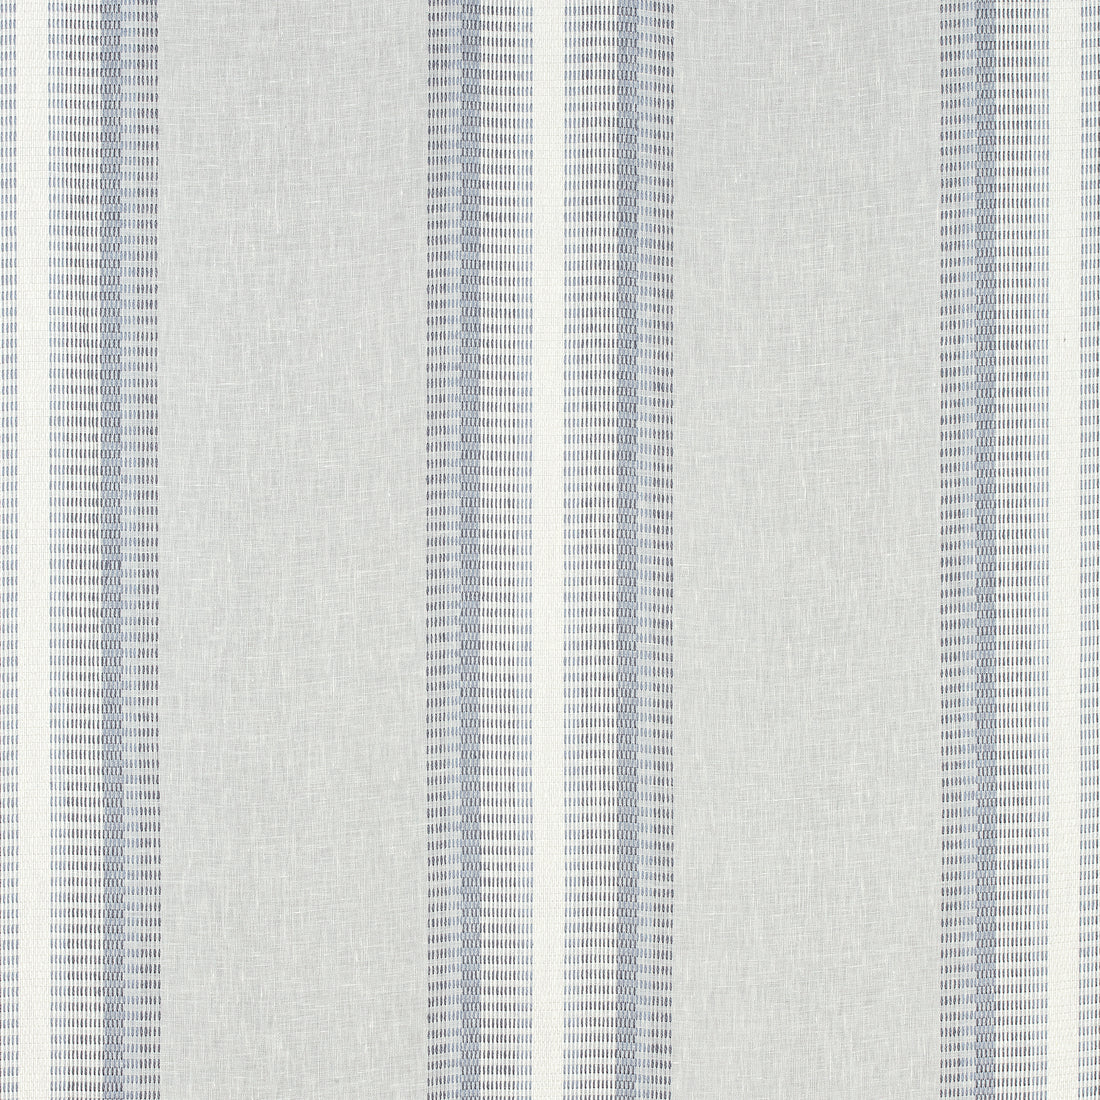 Brampton Stripe fabric in ocean color - pattern number FWW7164 - by Thibaut in the Atmosphere collection